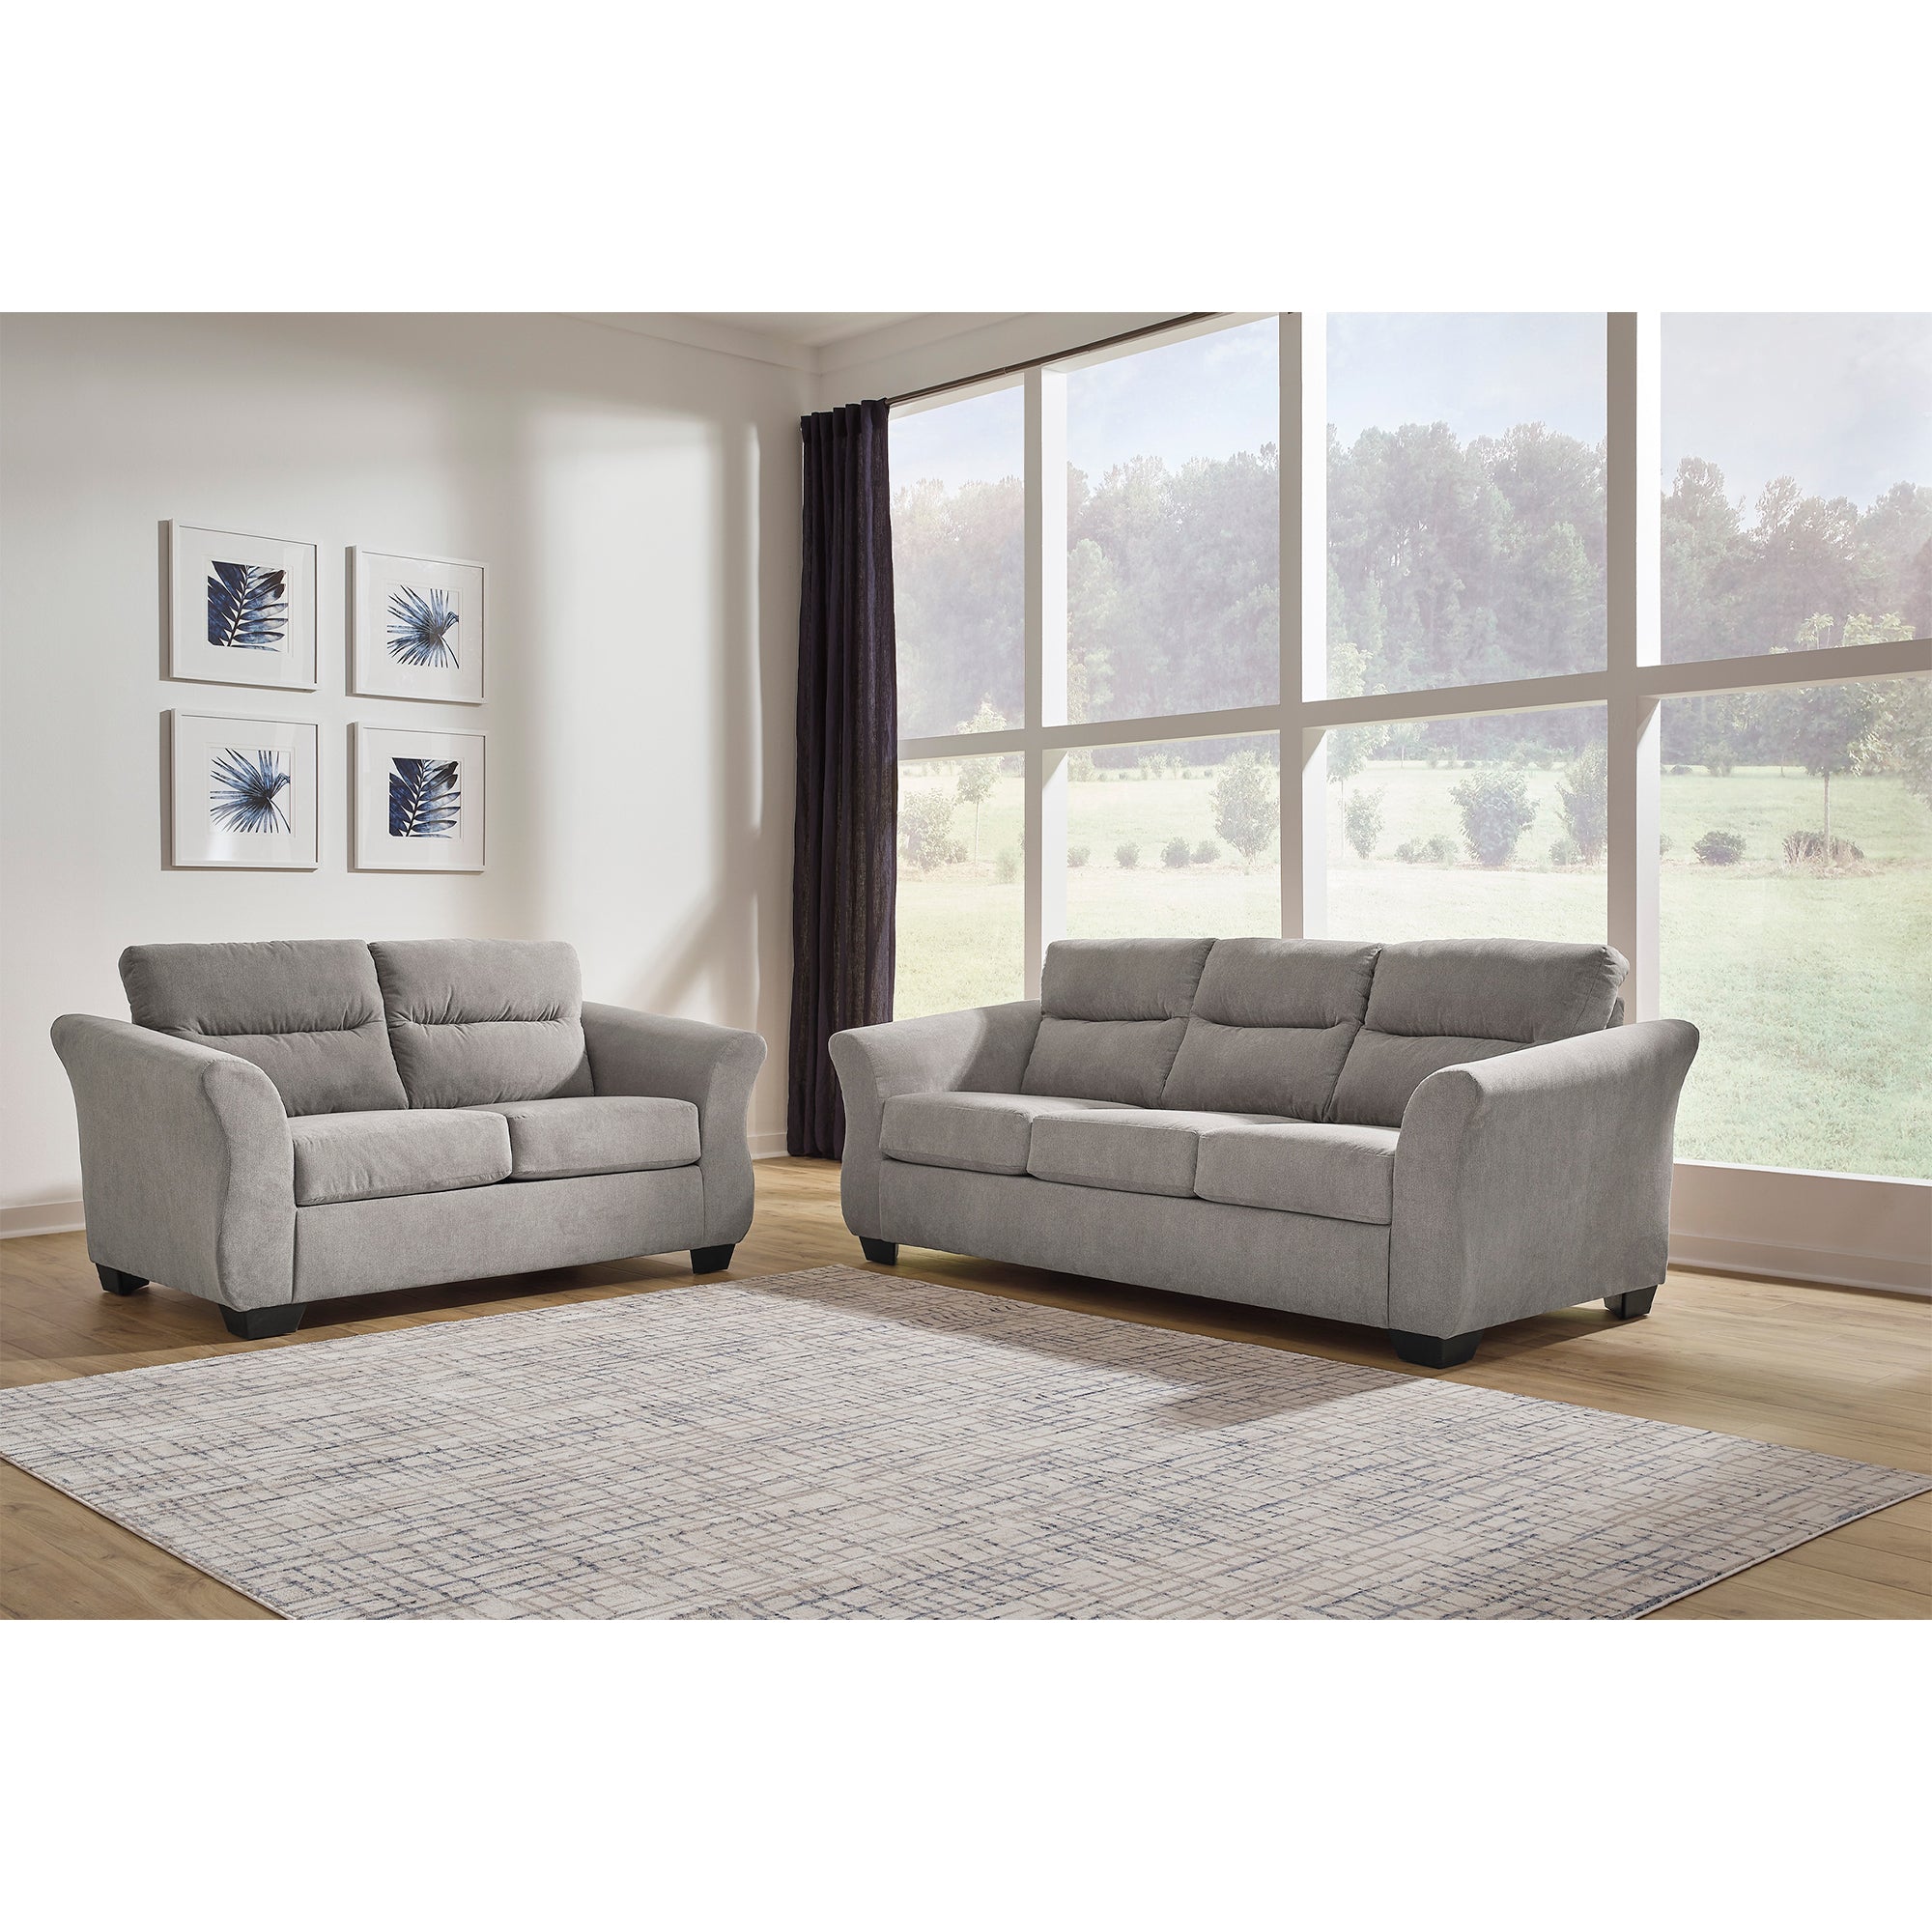 Miravel Sofa and Loveseat in Slate Color